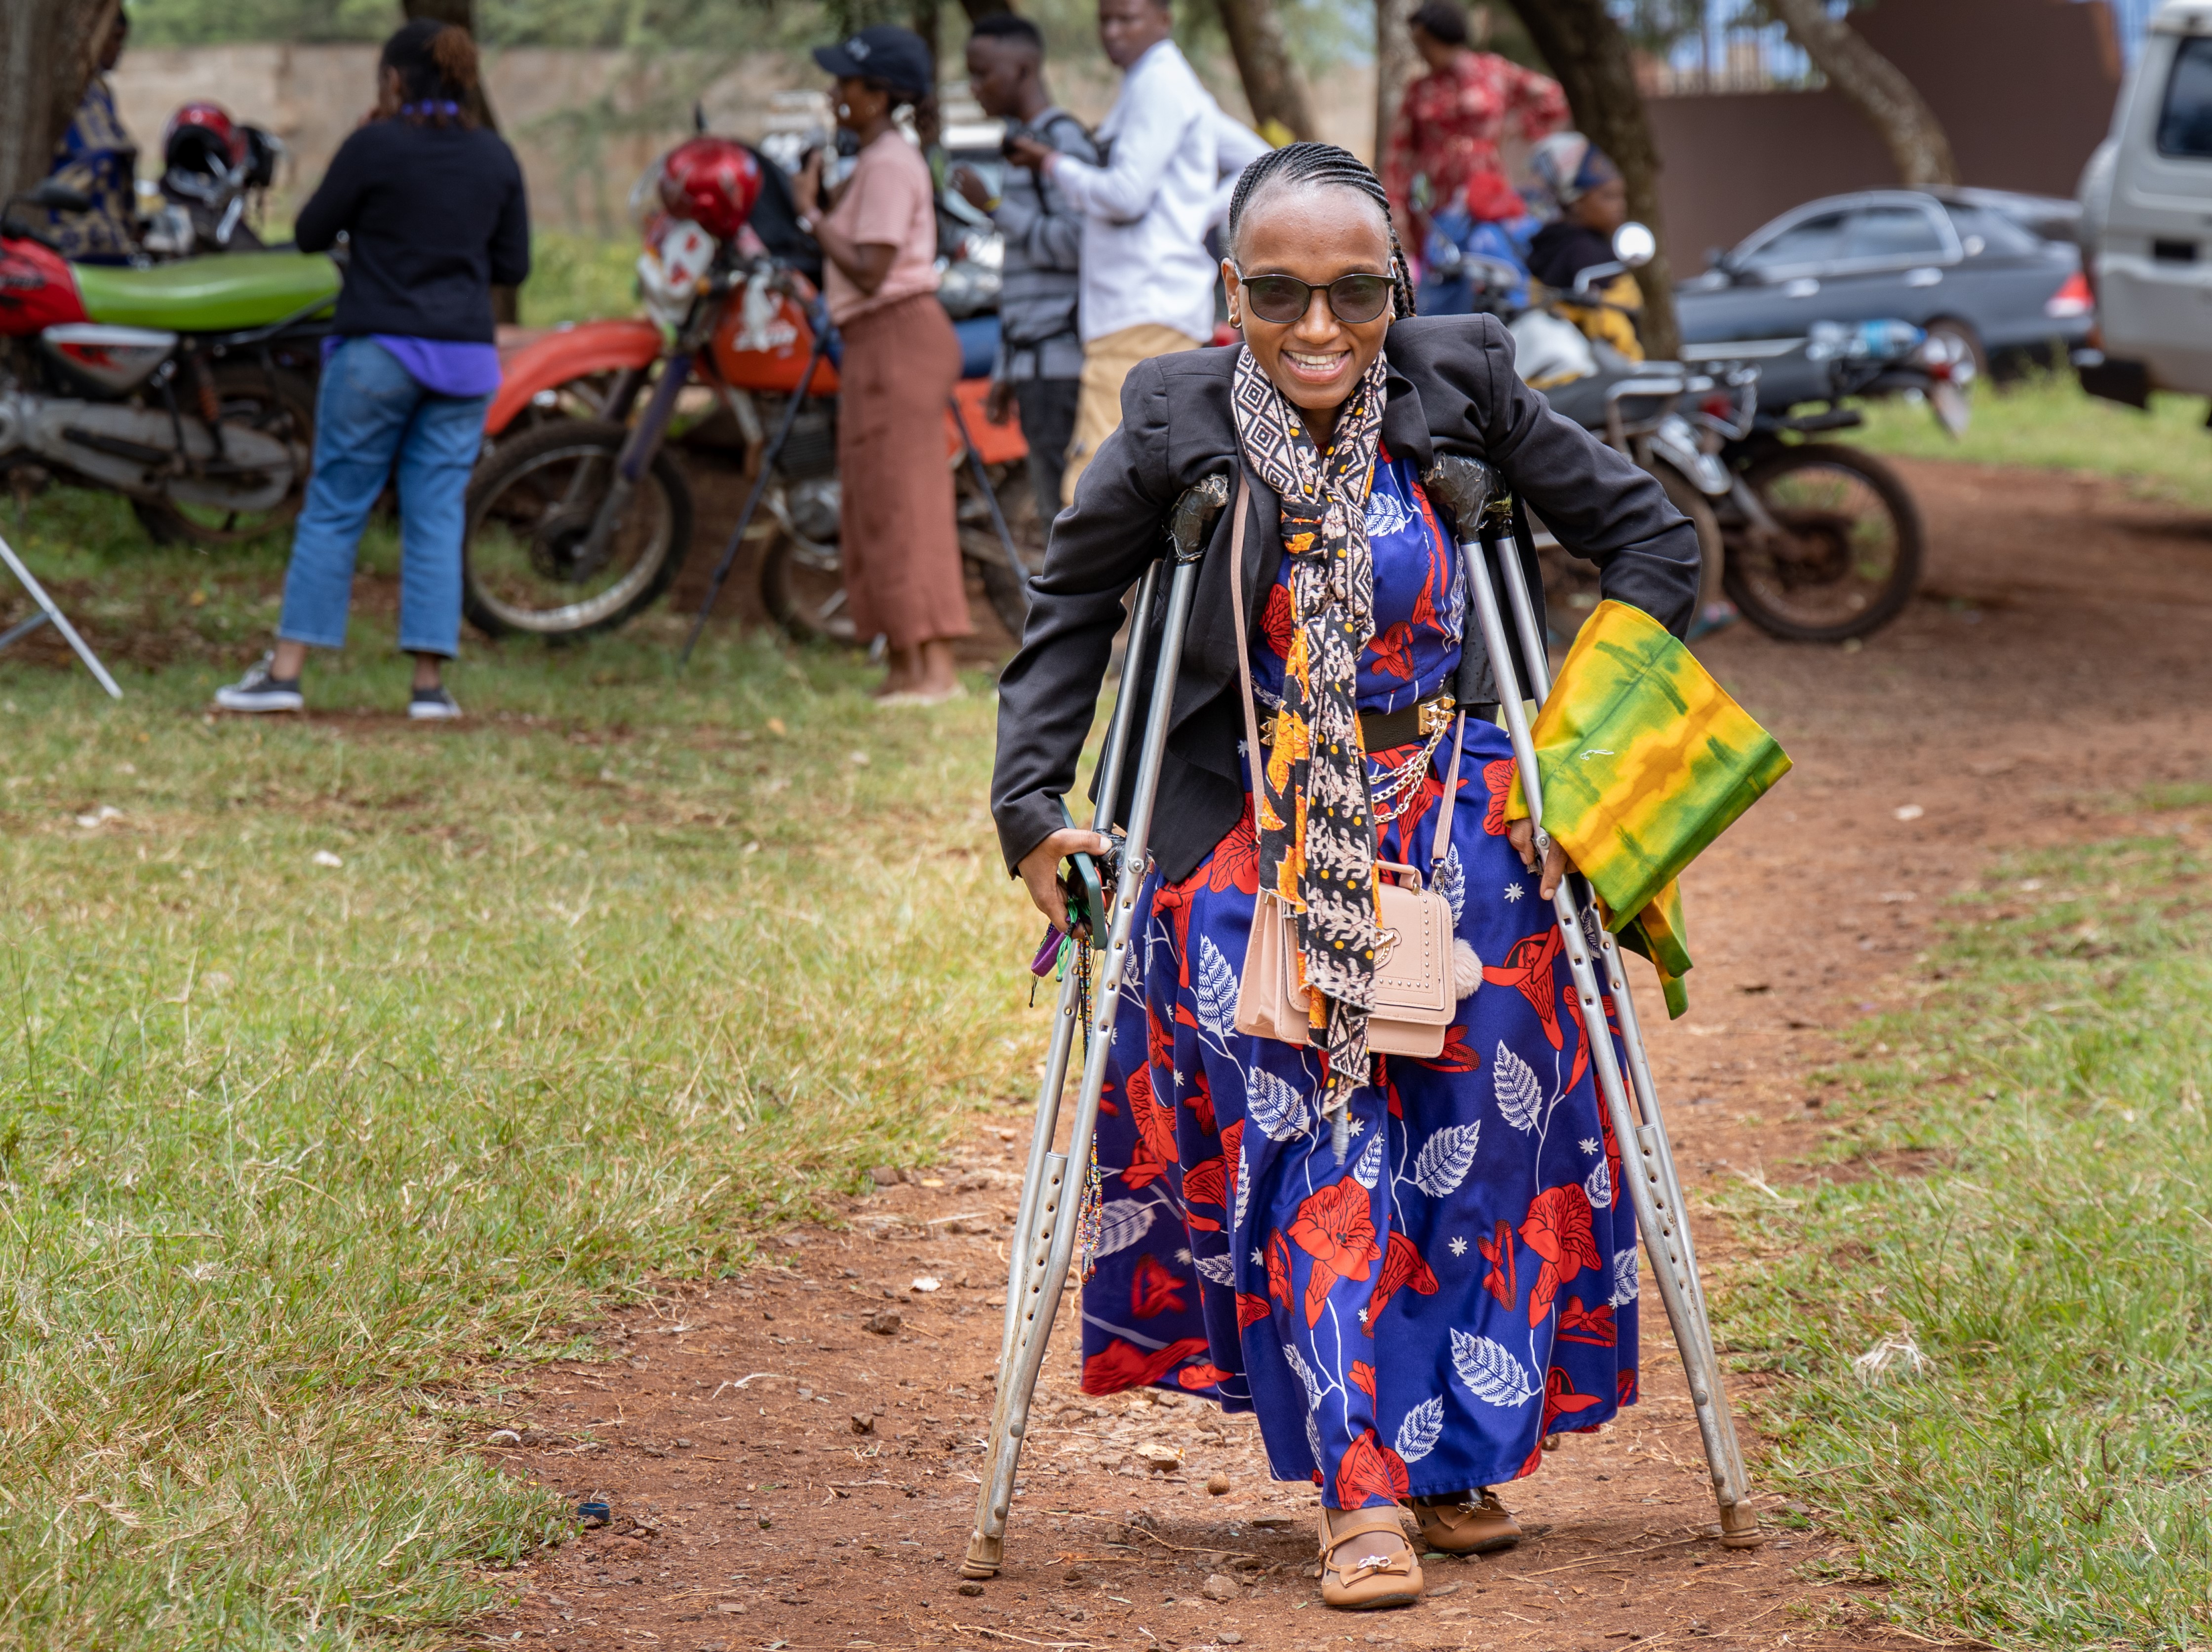 Paulina Sarwath, Chair of the Igo group of women with disabilities in Arusha, Tanzania standing outside a group meeting. The group is supported by UN Women. Photo: UN Women/Phil Kabuje